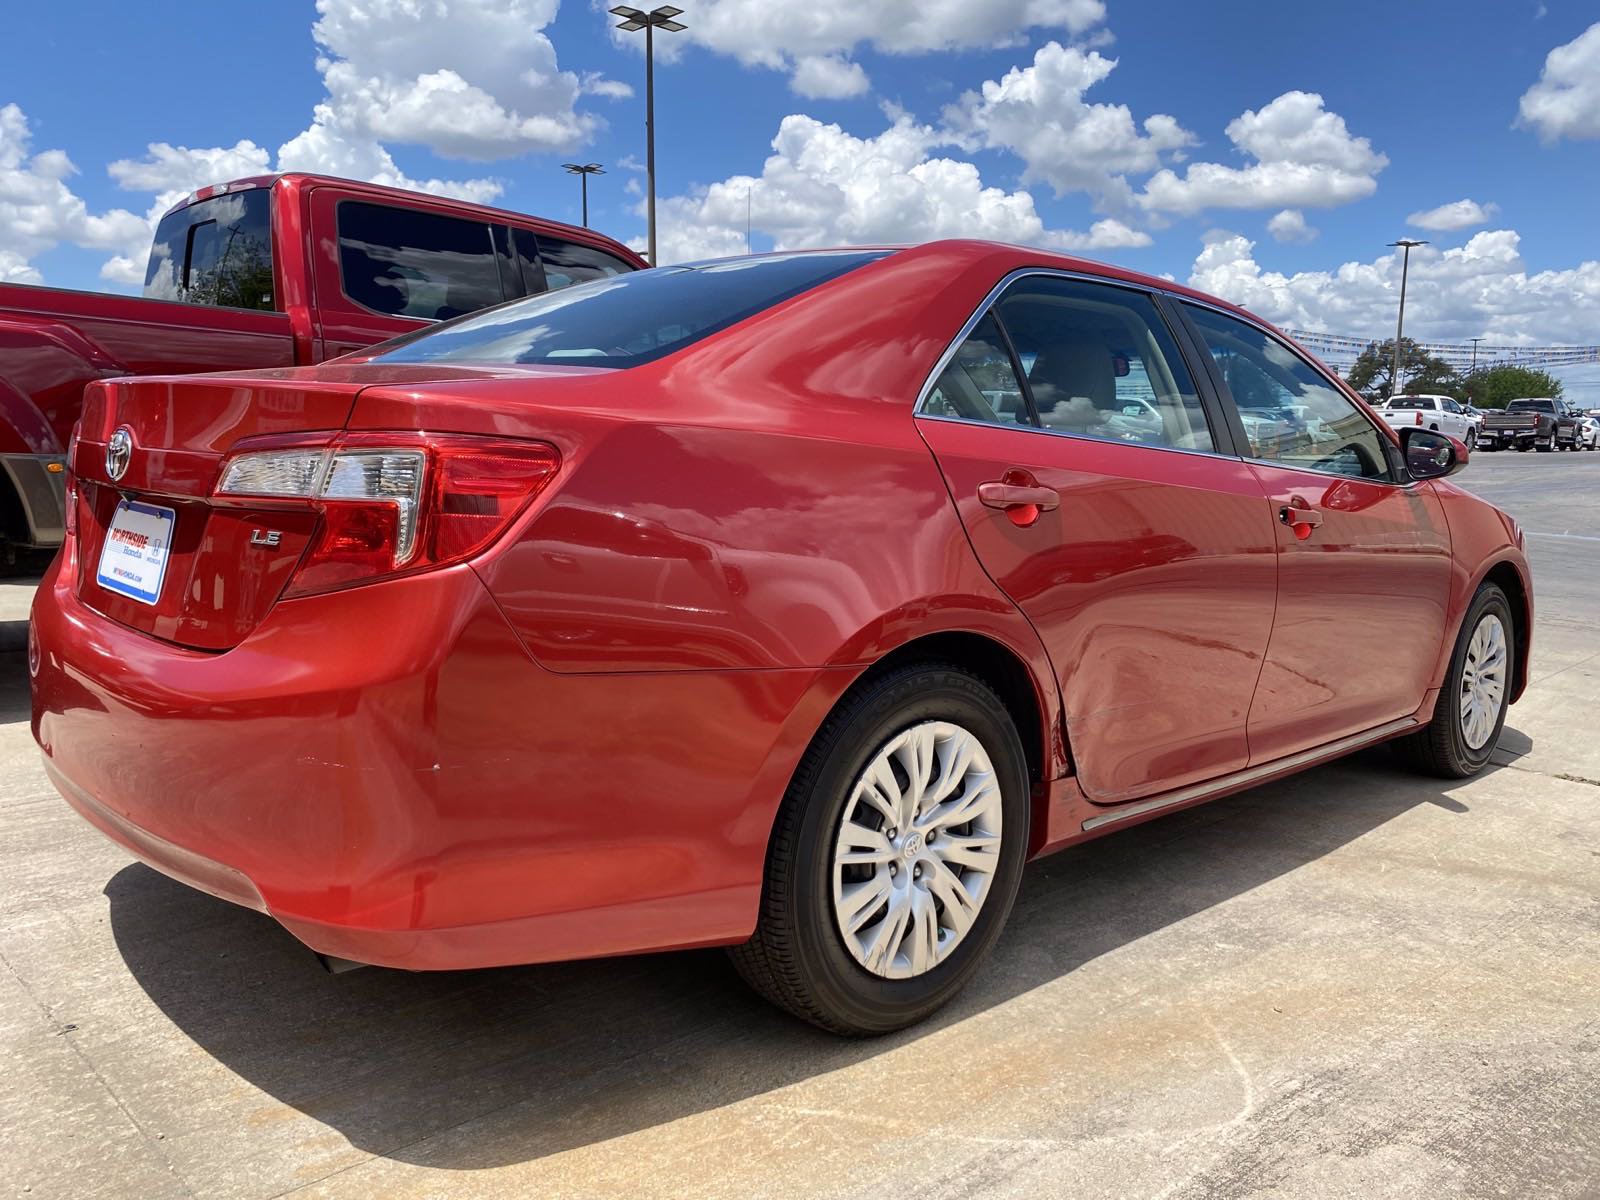 Pre-Owned 2012 Toyota Camry LE 4dr Car in San Antonio | Northside Honda